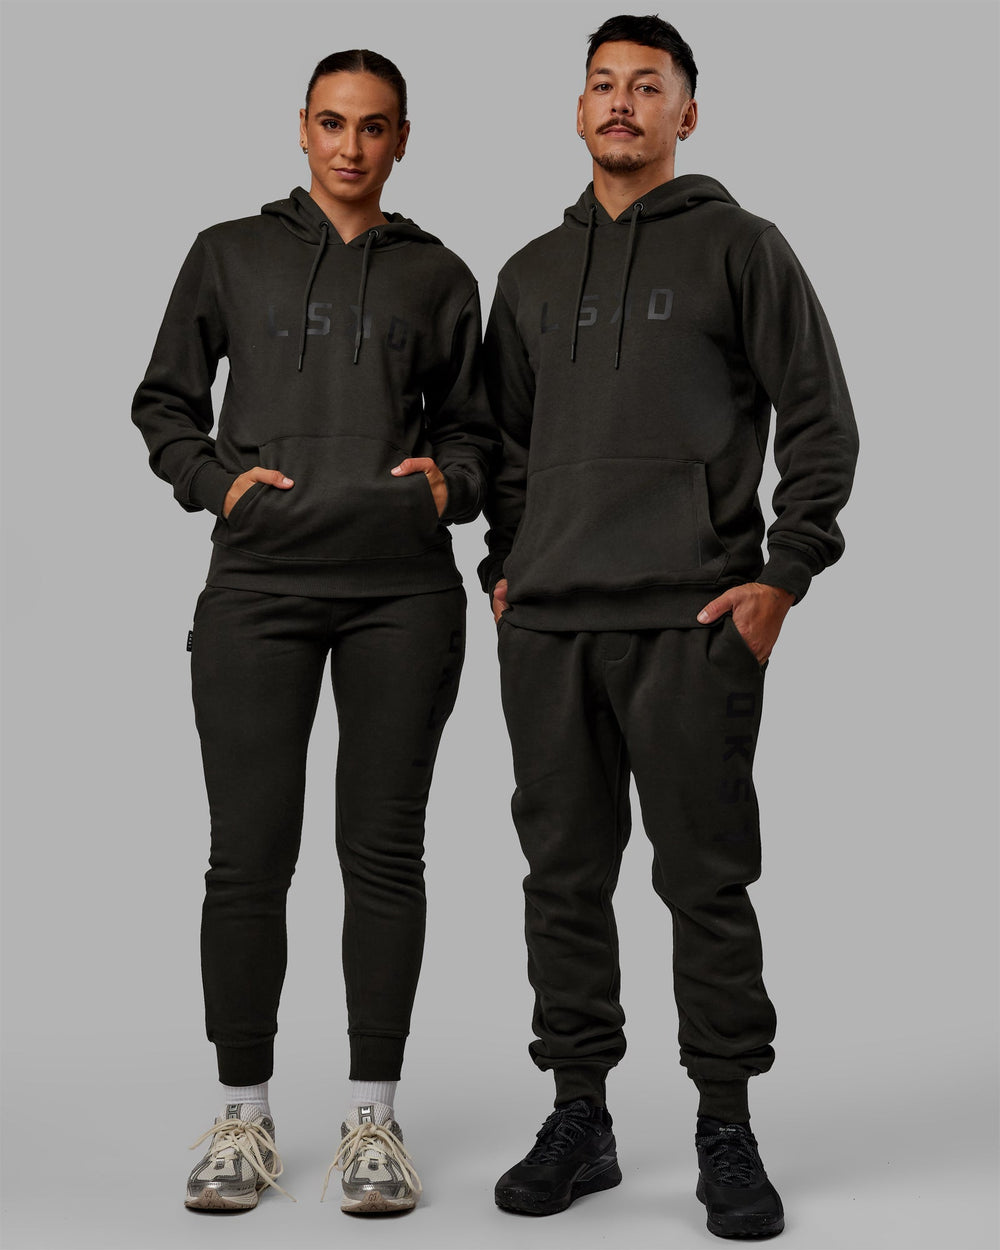 Duo wearing Unisex Structure Joggers - Pirate Black-Black